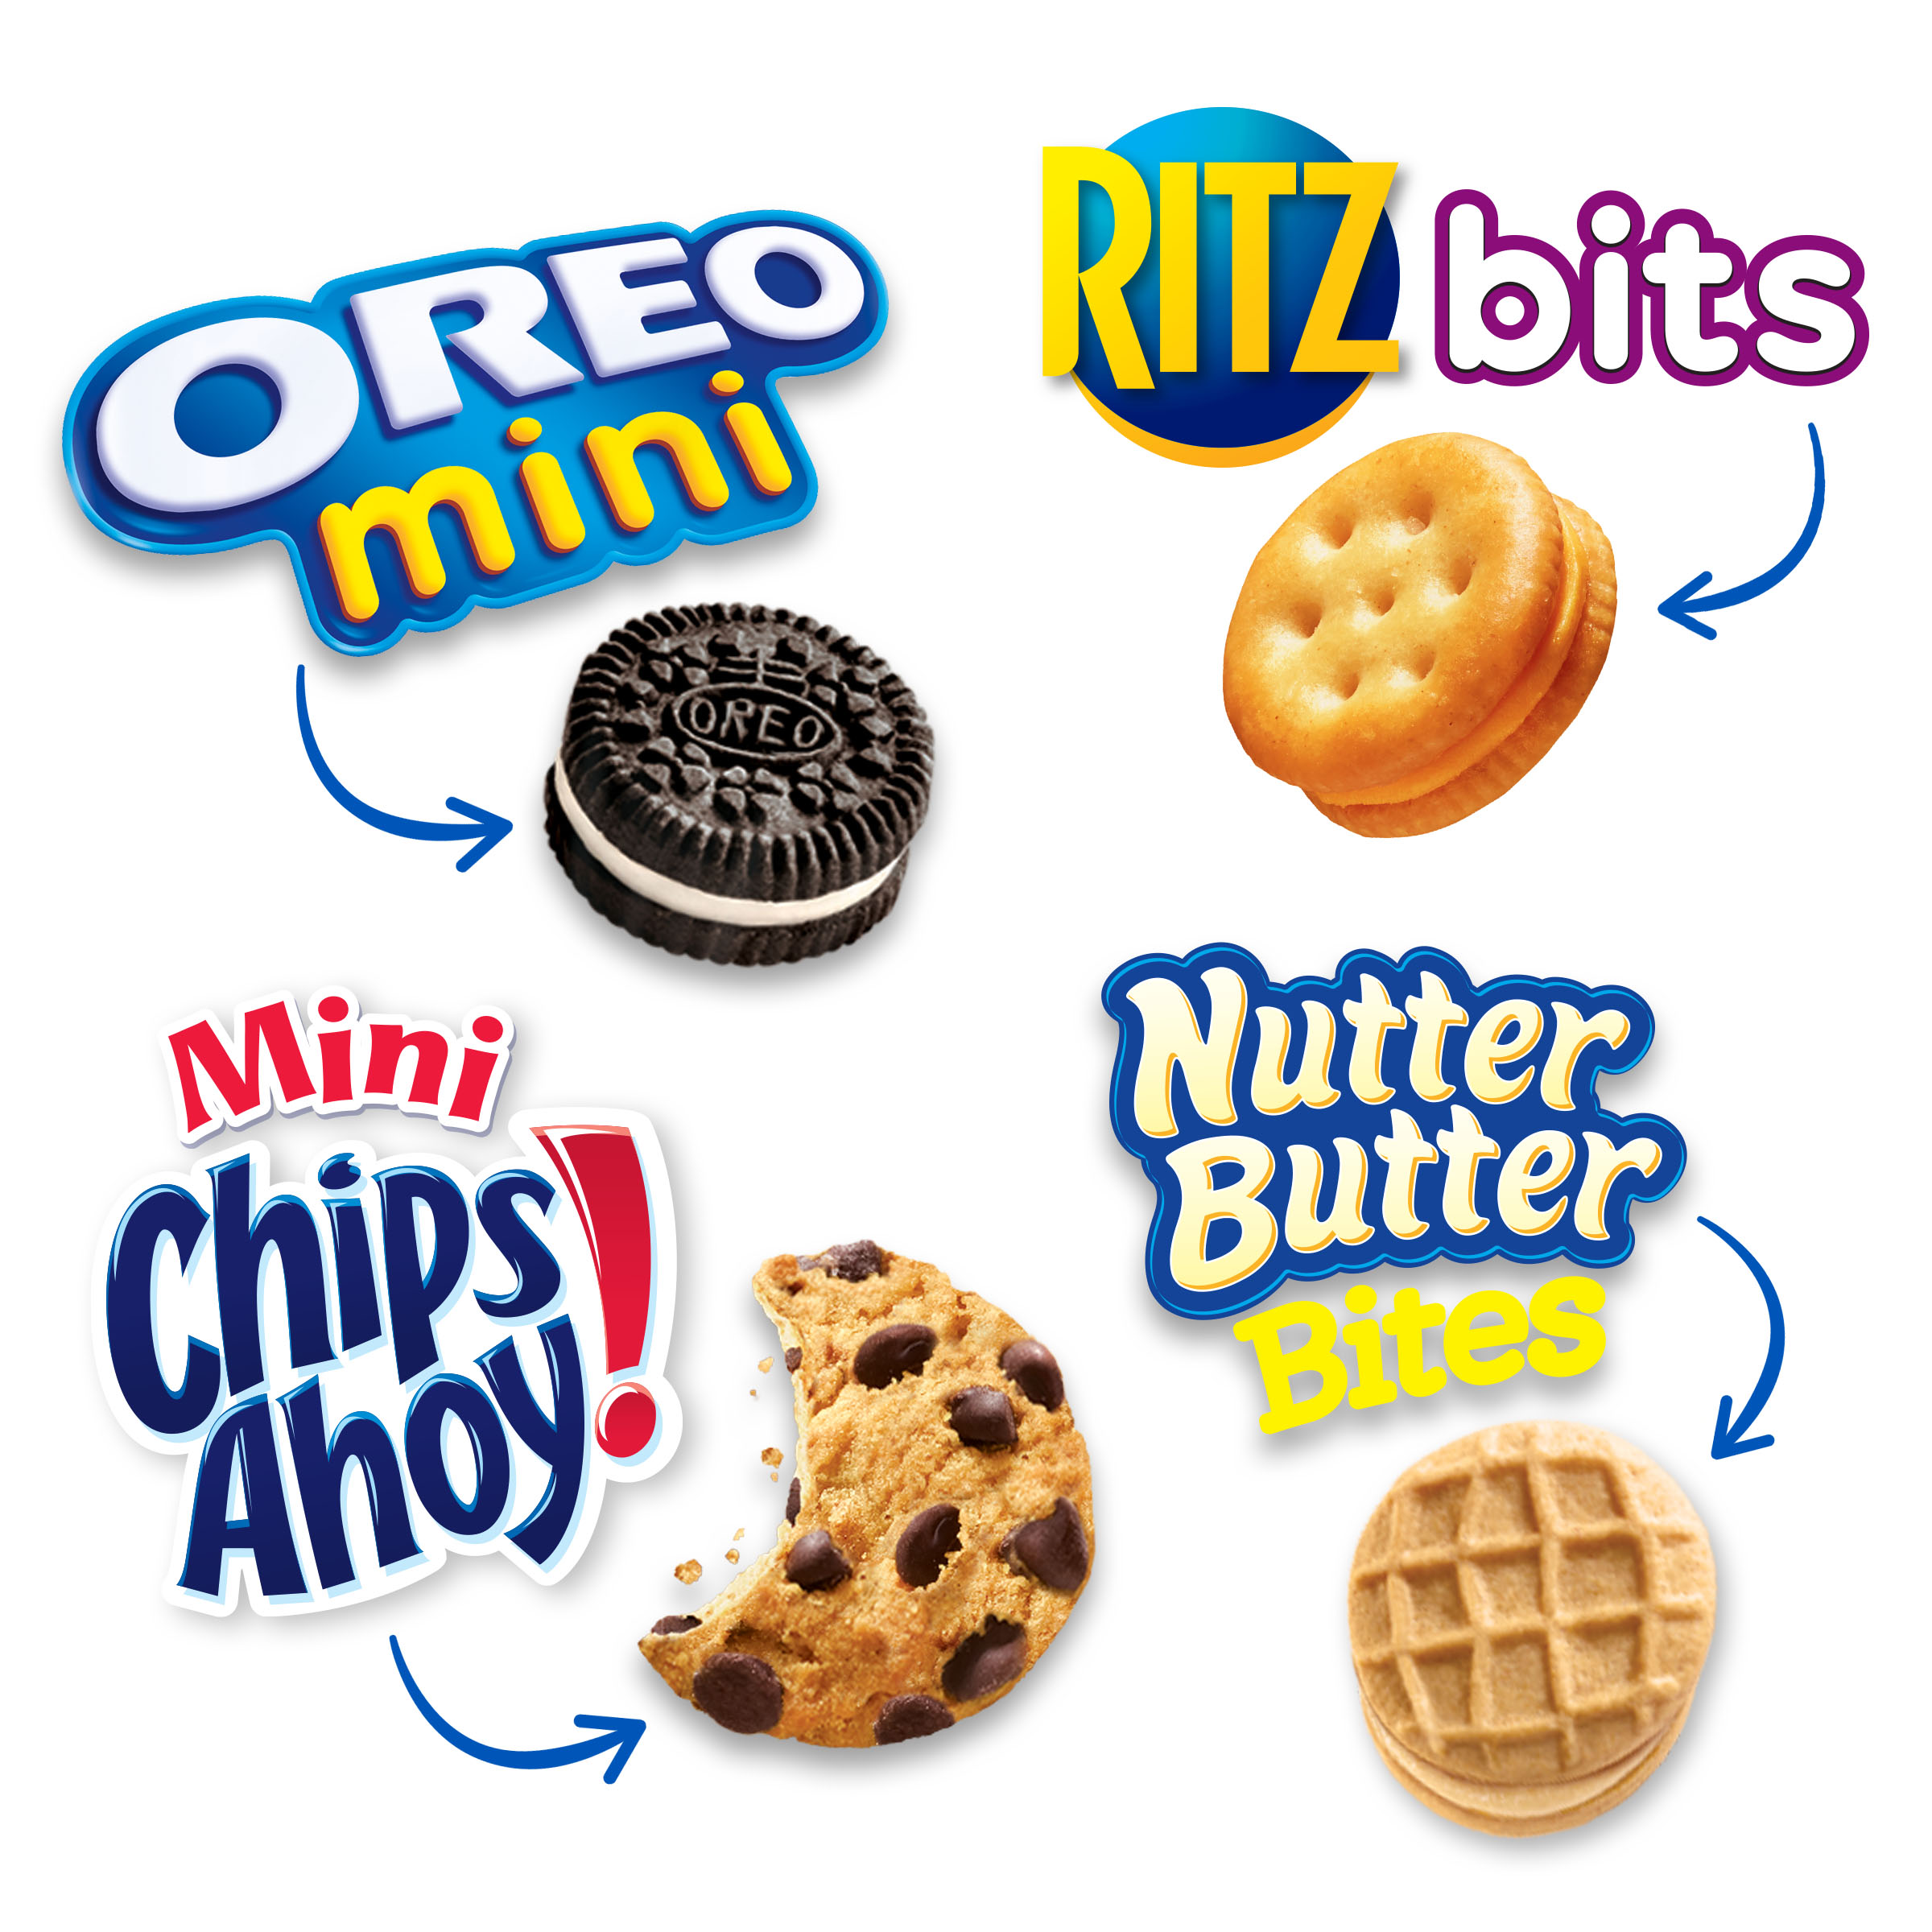 Nabisco Classic Mix Variety Pack, OREO Mini, CHIPS AHOY! Mini, Nutter Butter Bites, RITZ Bits Cheese, Easter Snacks, 20 Snack Packs - image 4 of 12